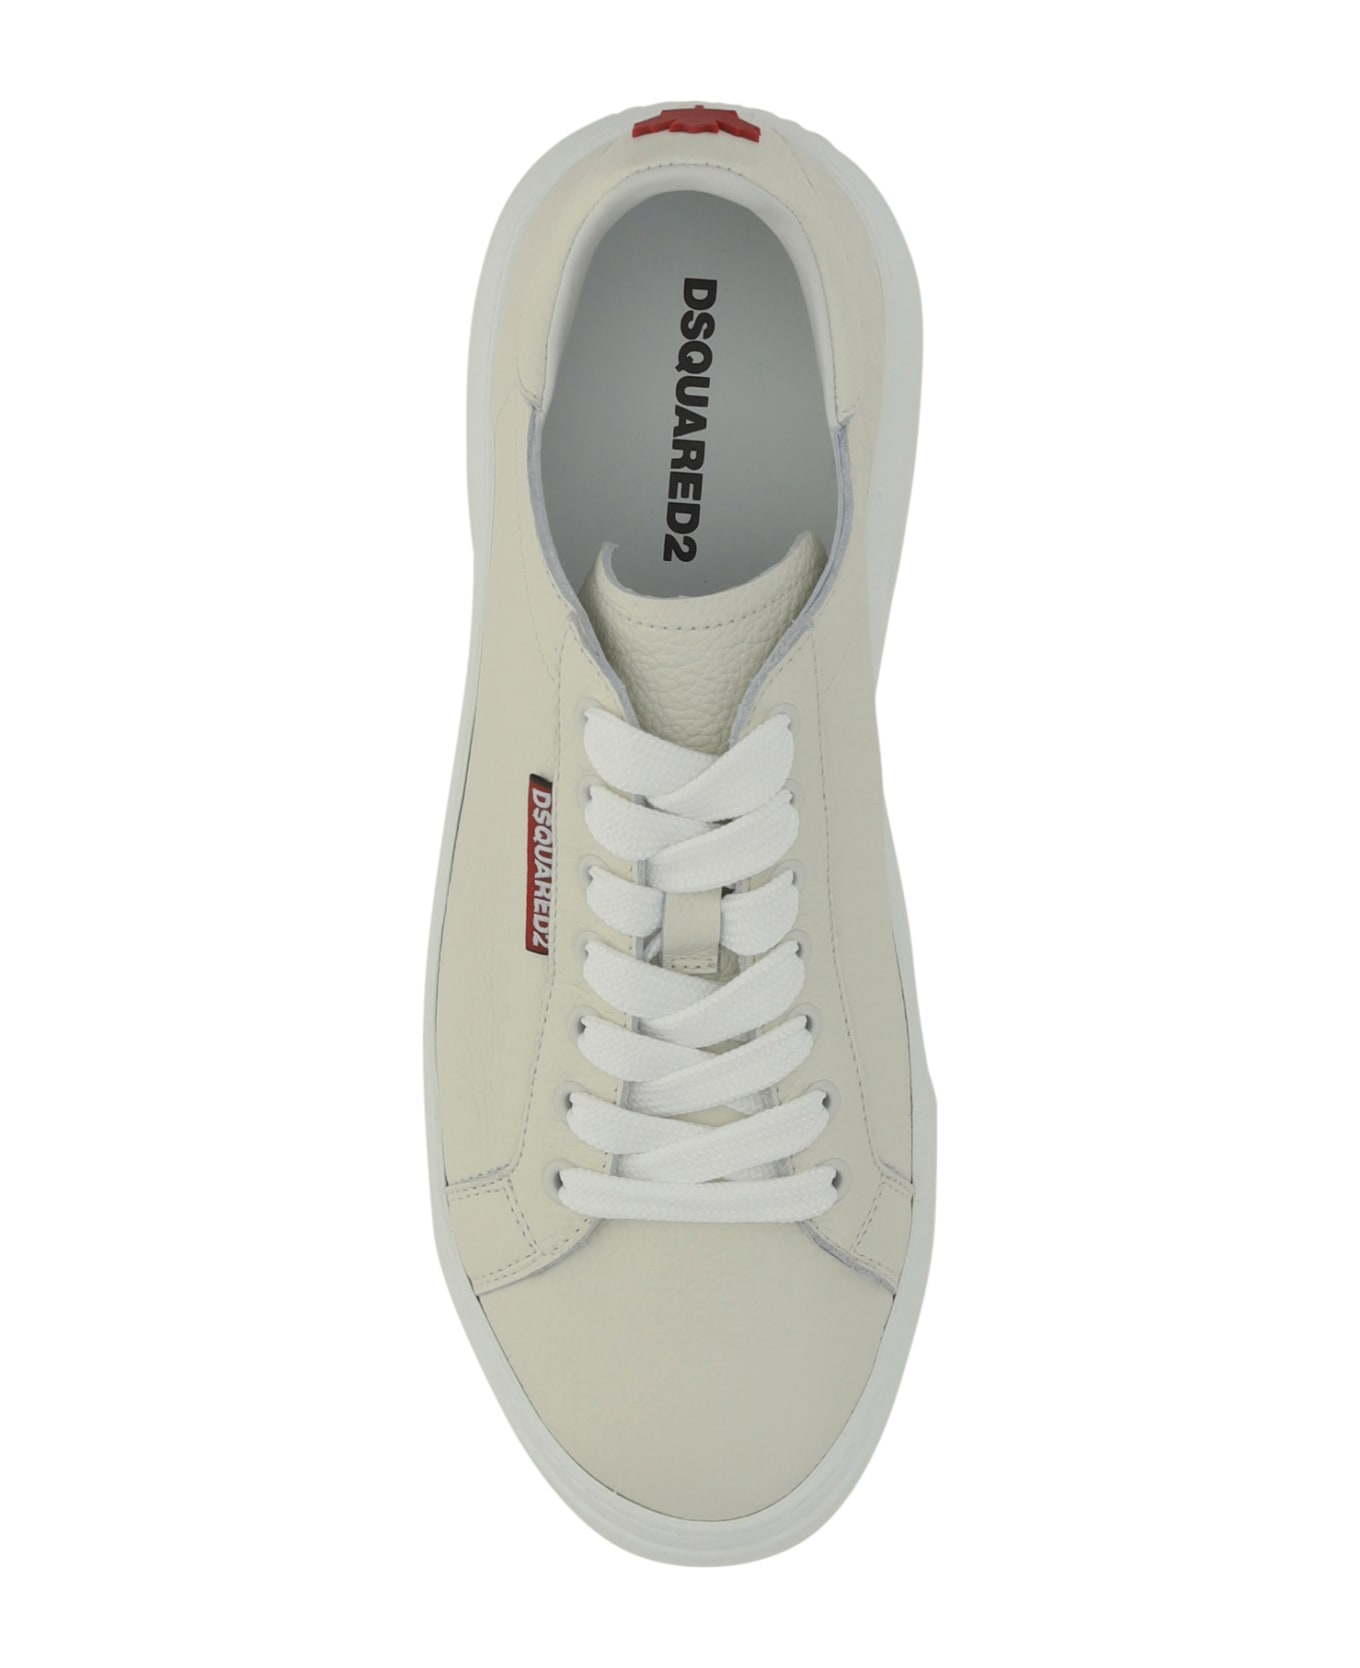 Dsquared2 Sneakers - Panna スニーカー